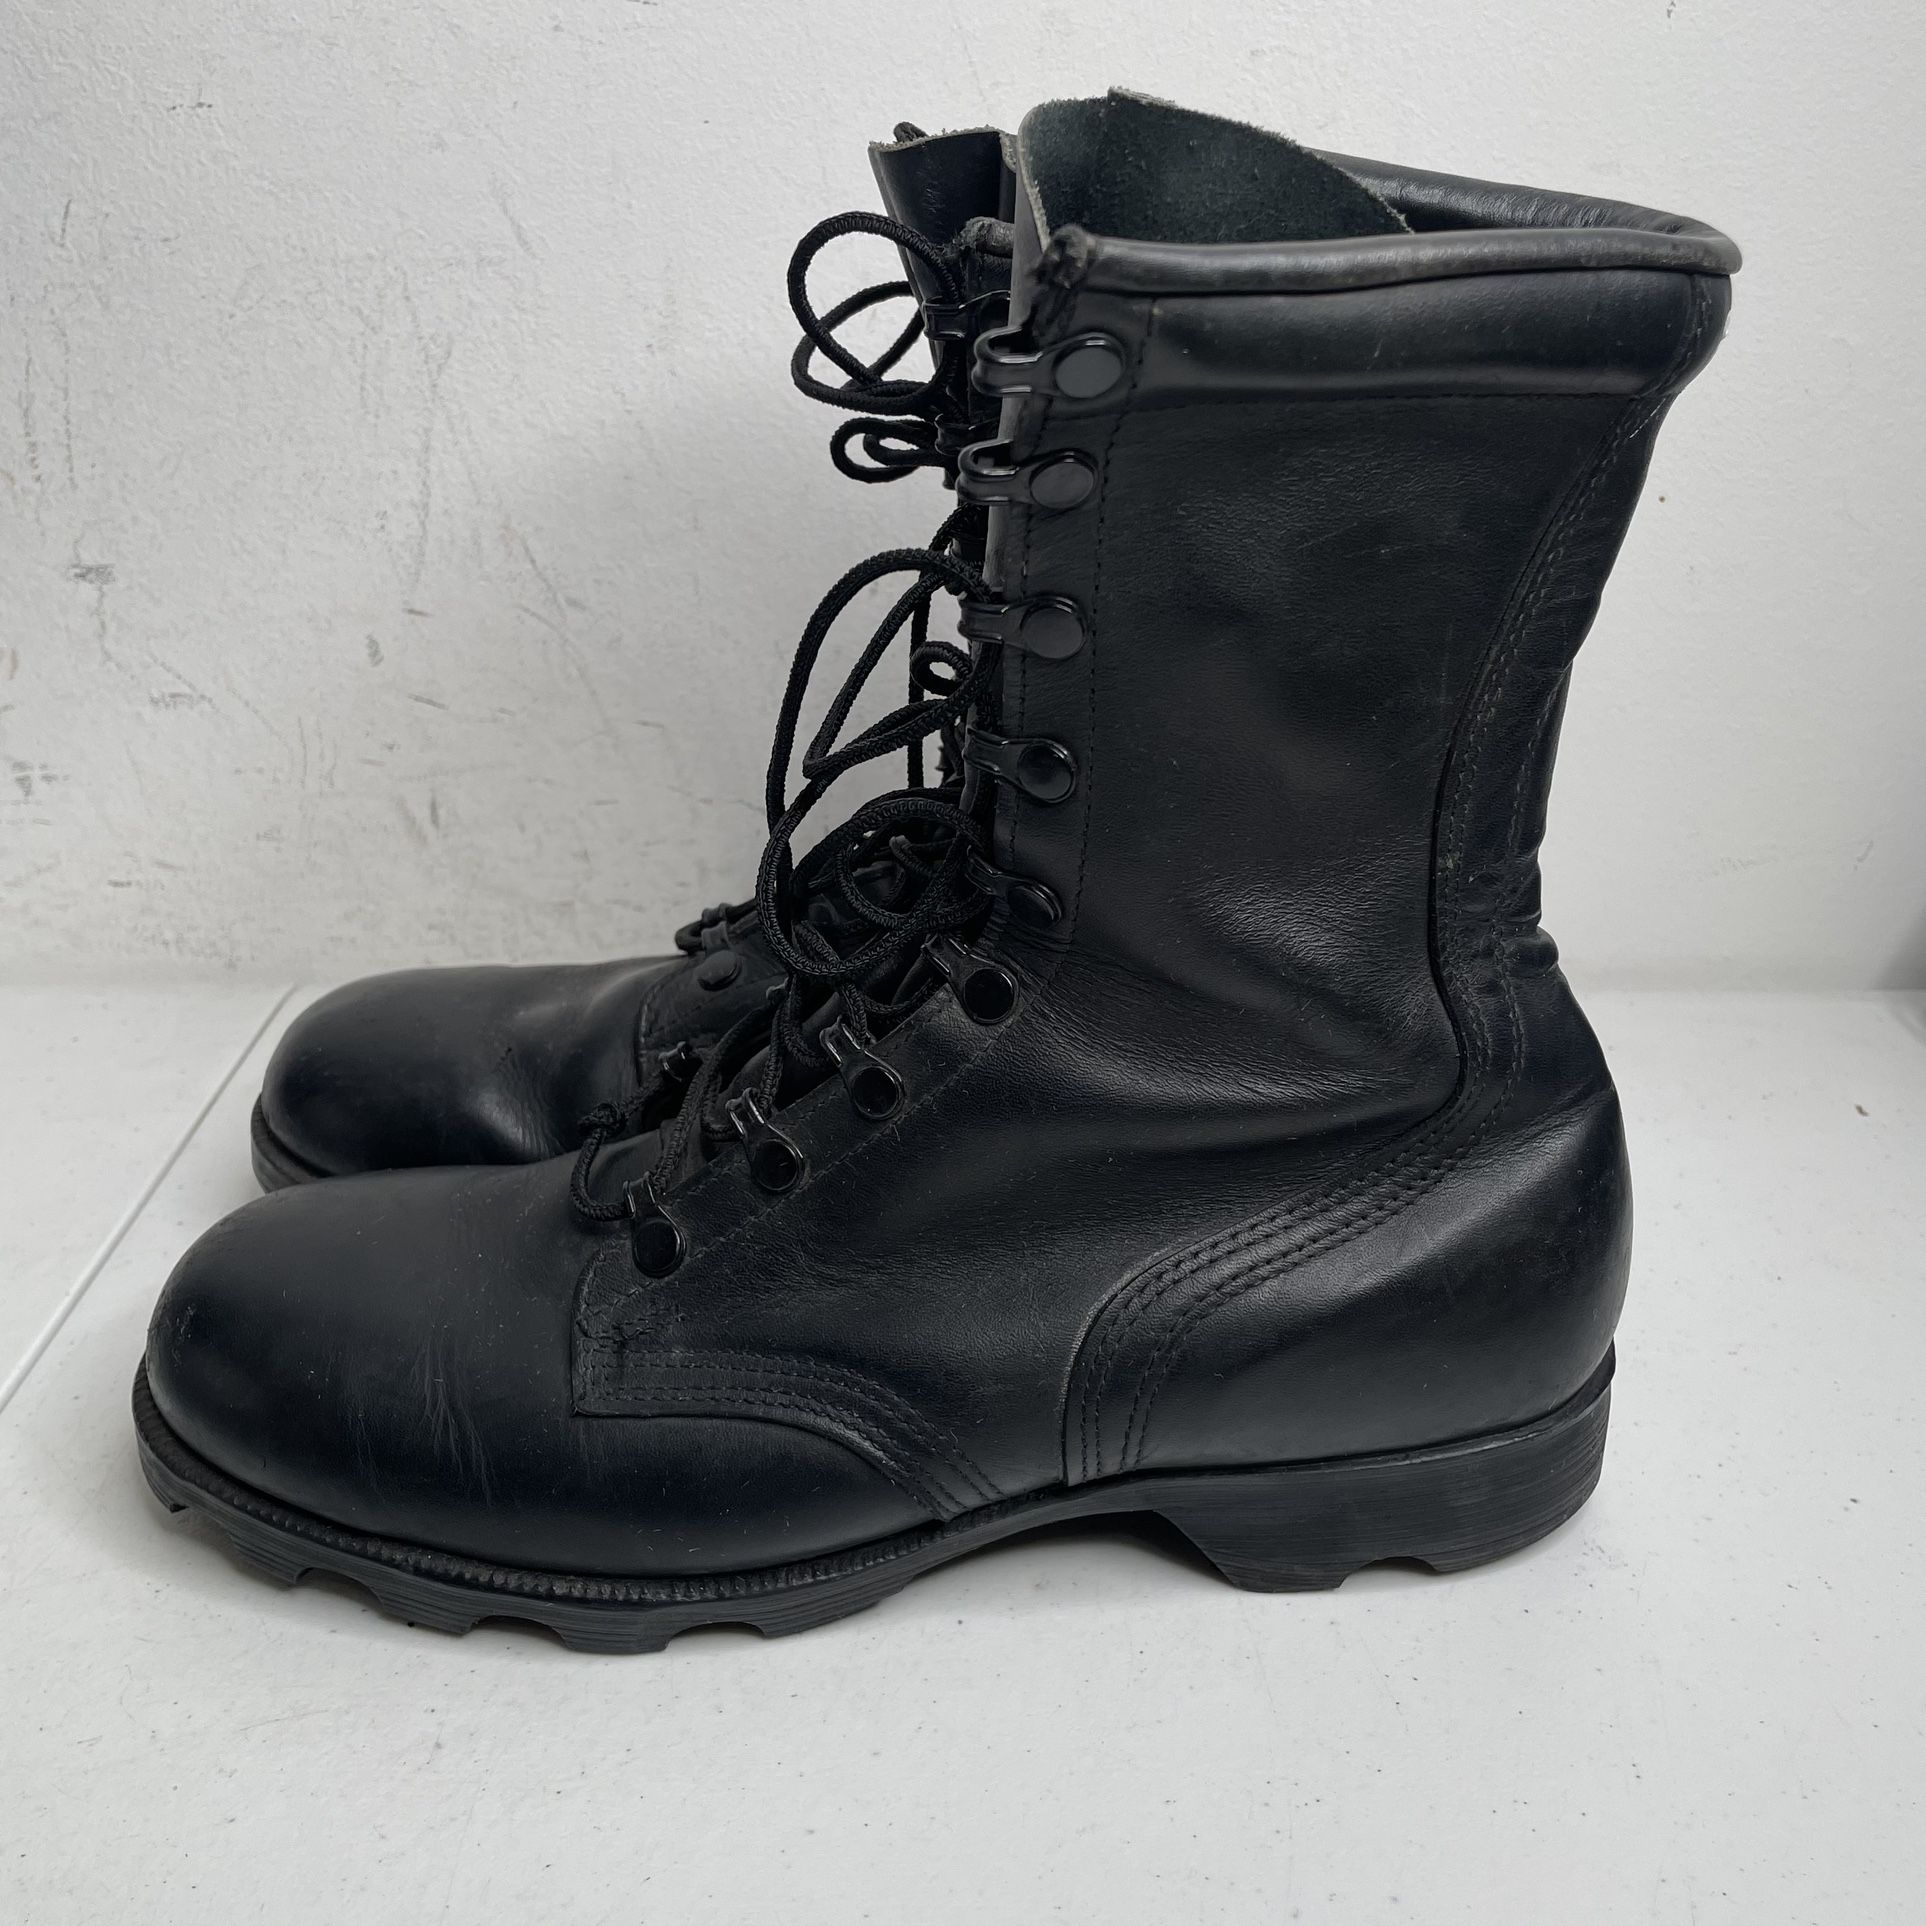 Vintage Military Boots Size 8.5 W